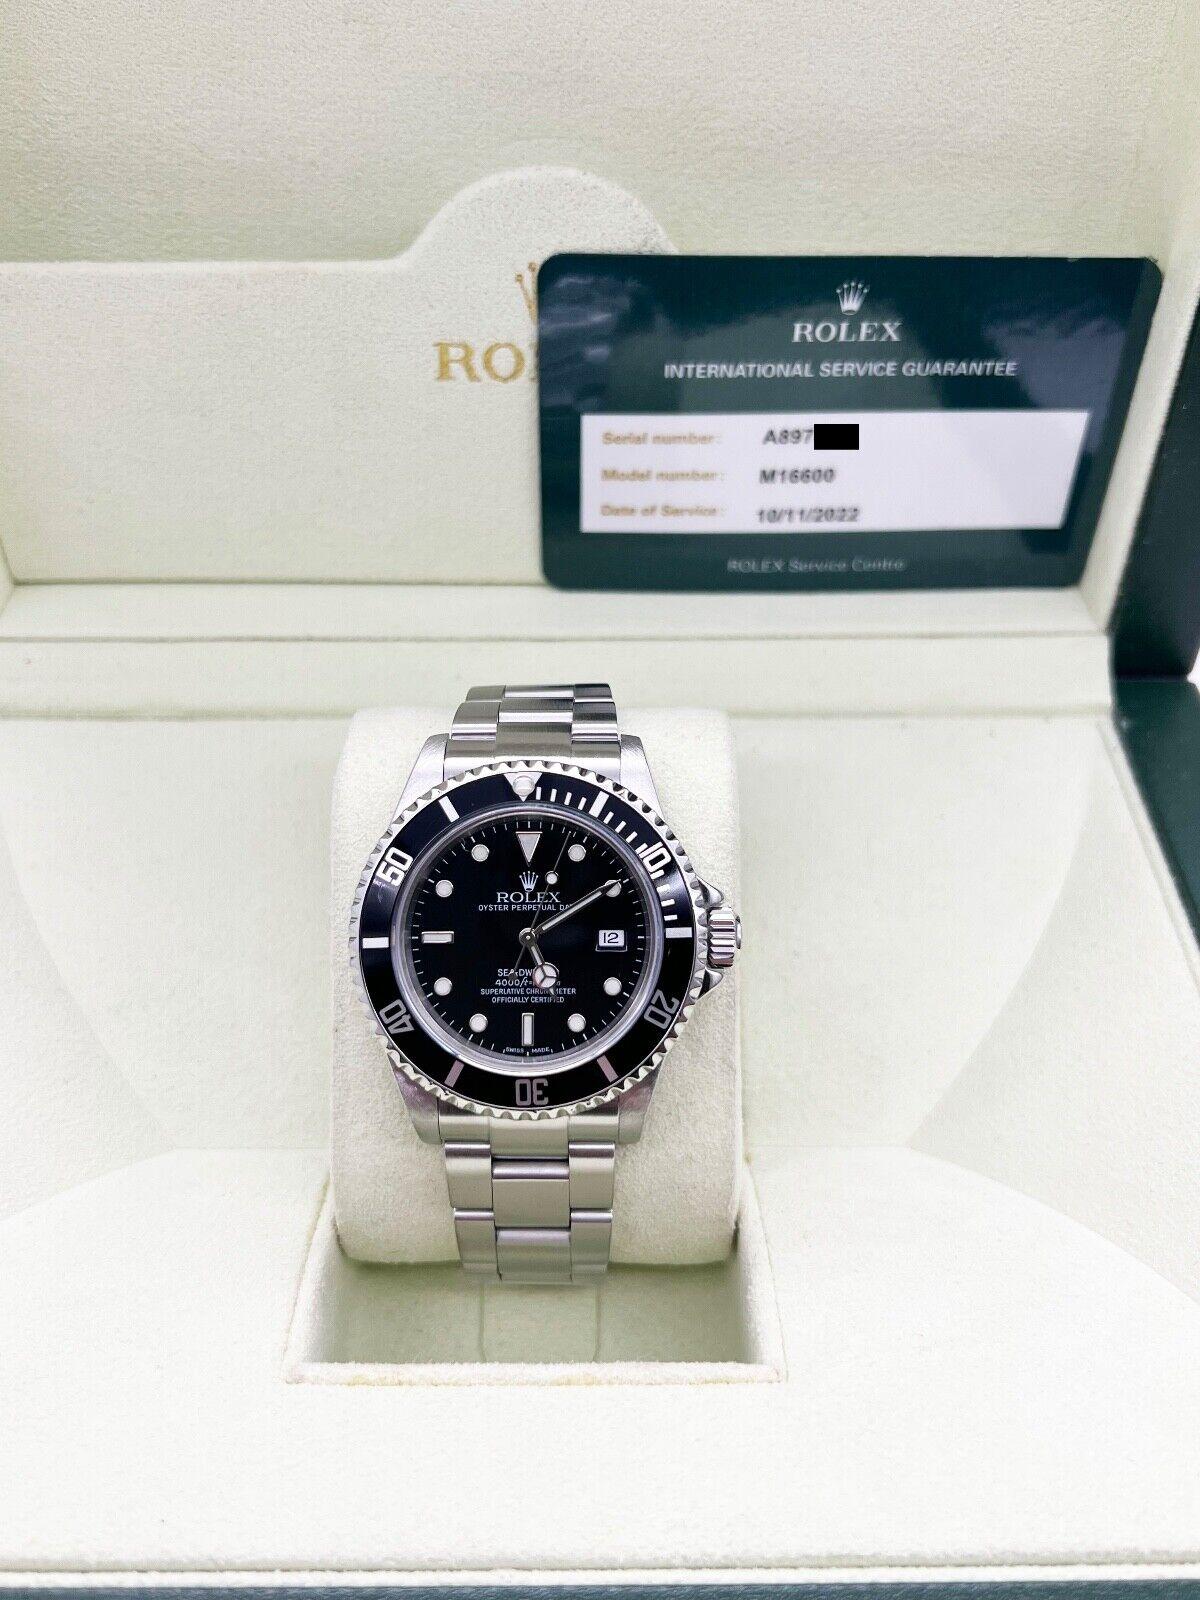 Rolex Sea Dweller 16600 Black Stainless Steel Box and 2022 Service Card  3